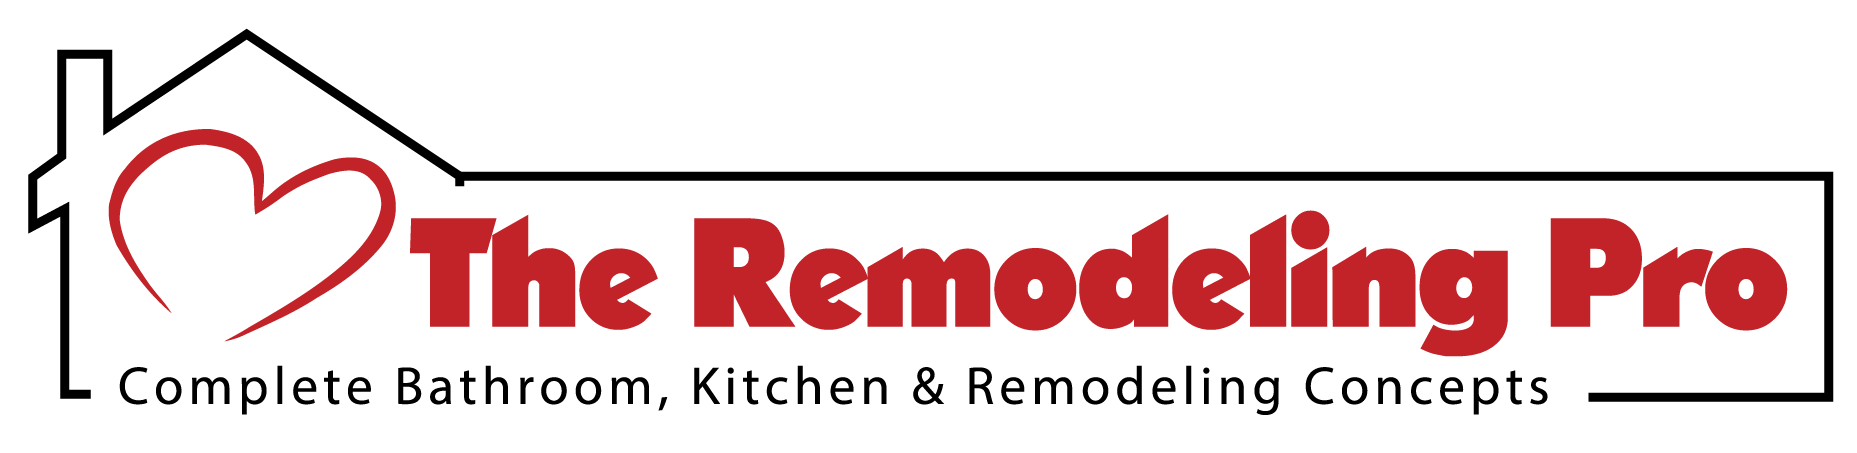 The Remodeling Pro Logo